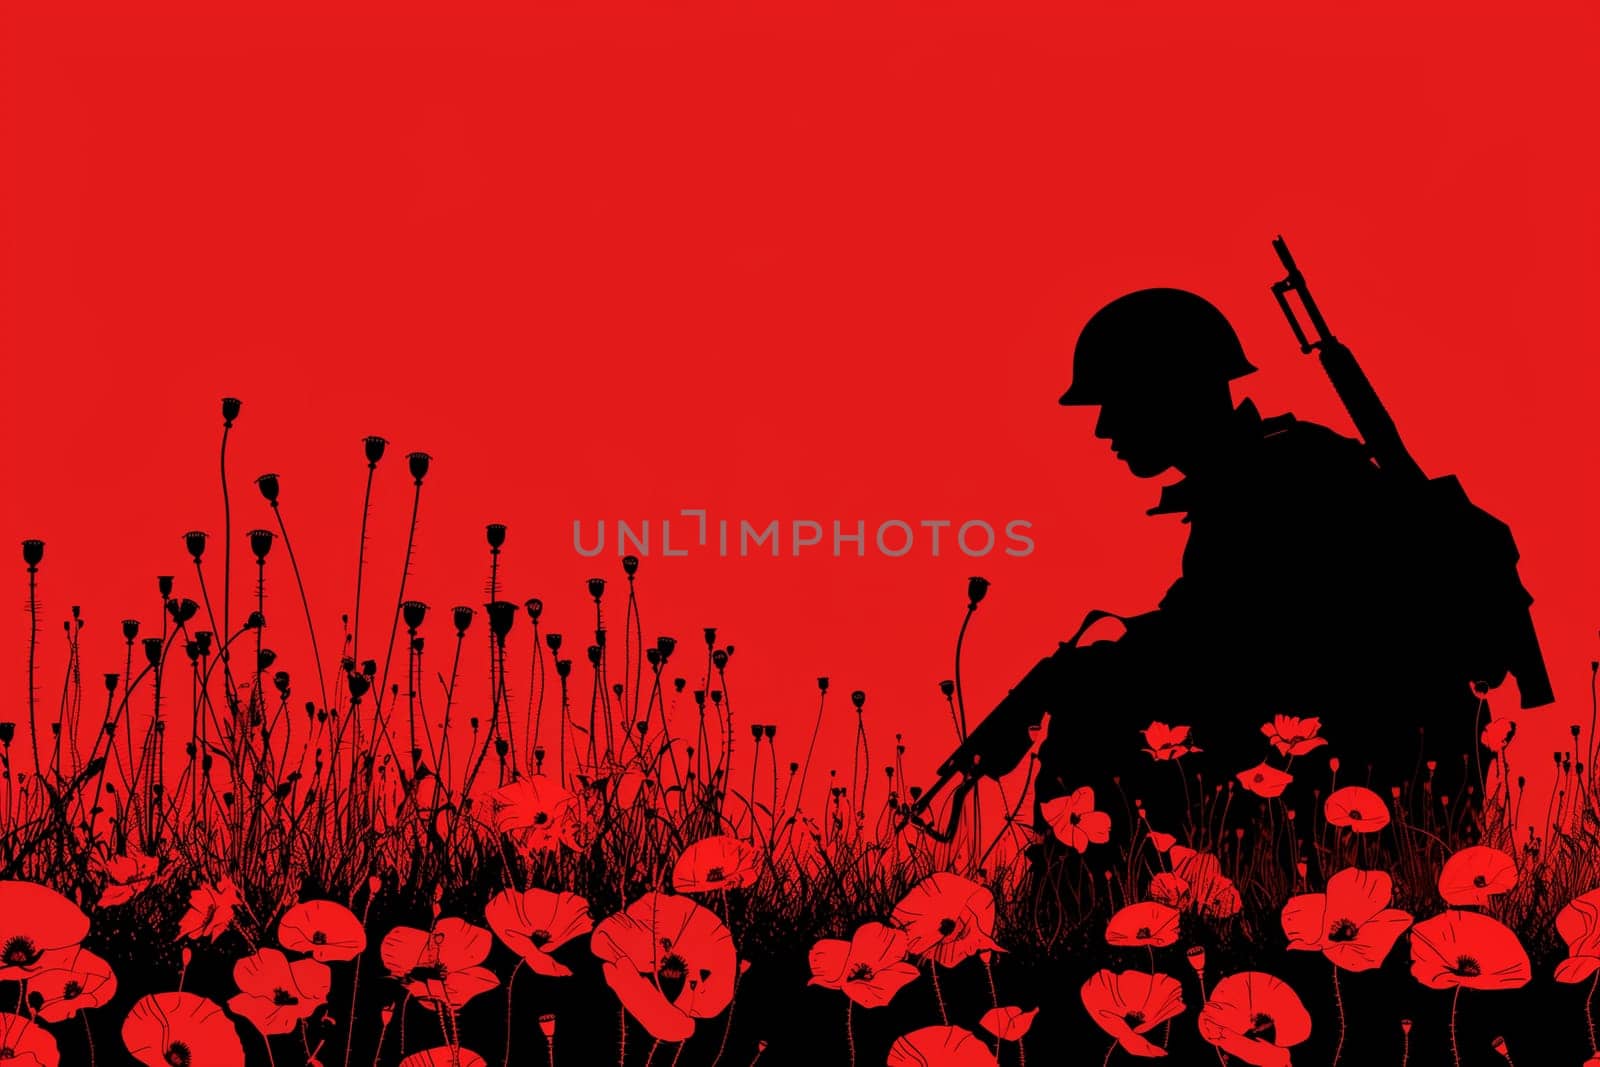 A soldier in silhouette kneels in a field of vibrant red poppies, paying homage to fallen comrades in a solemn moment of remembrance.